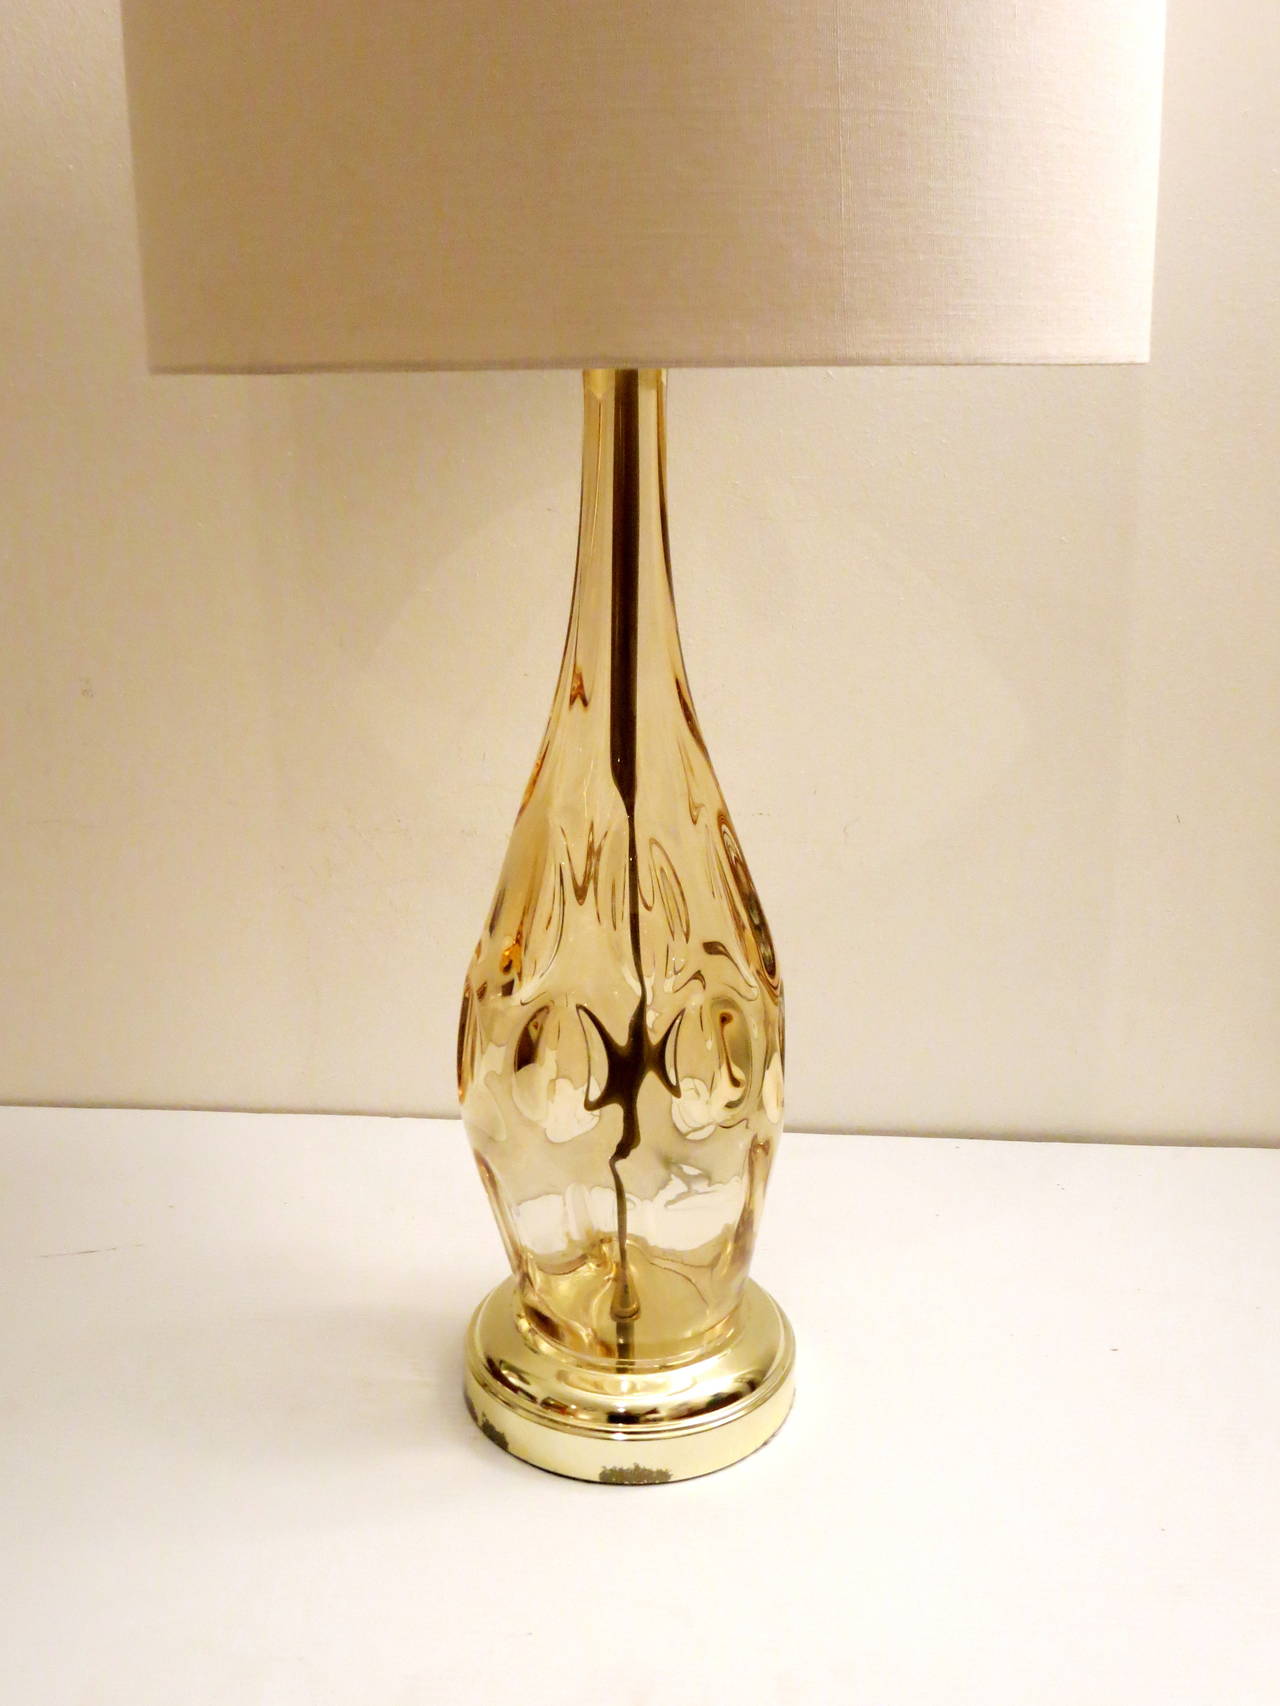 Blown Glass 1950s Murano Italian tall thick scaloped glass lamp with brass fittings